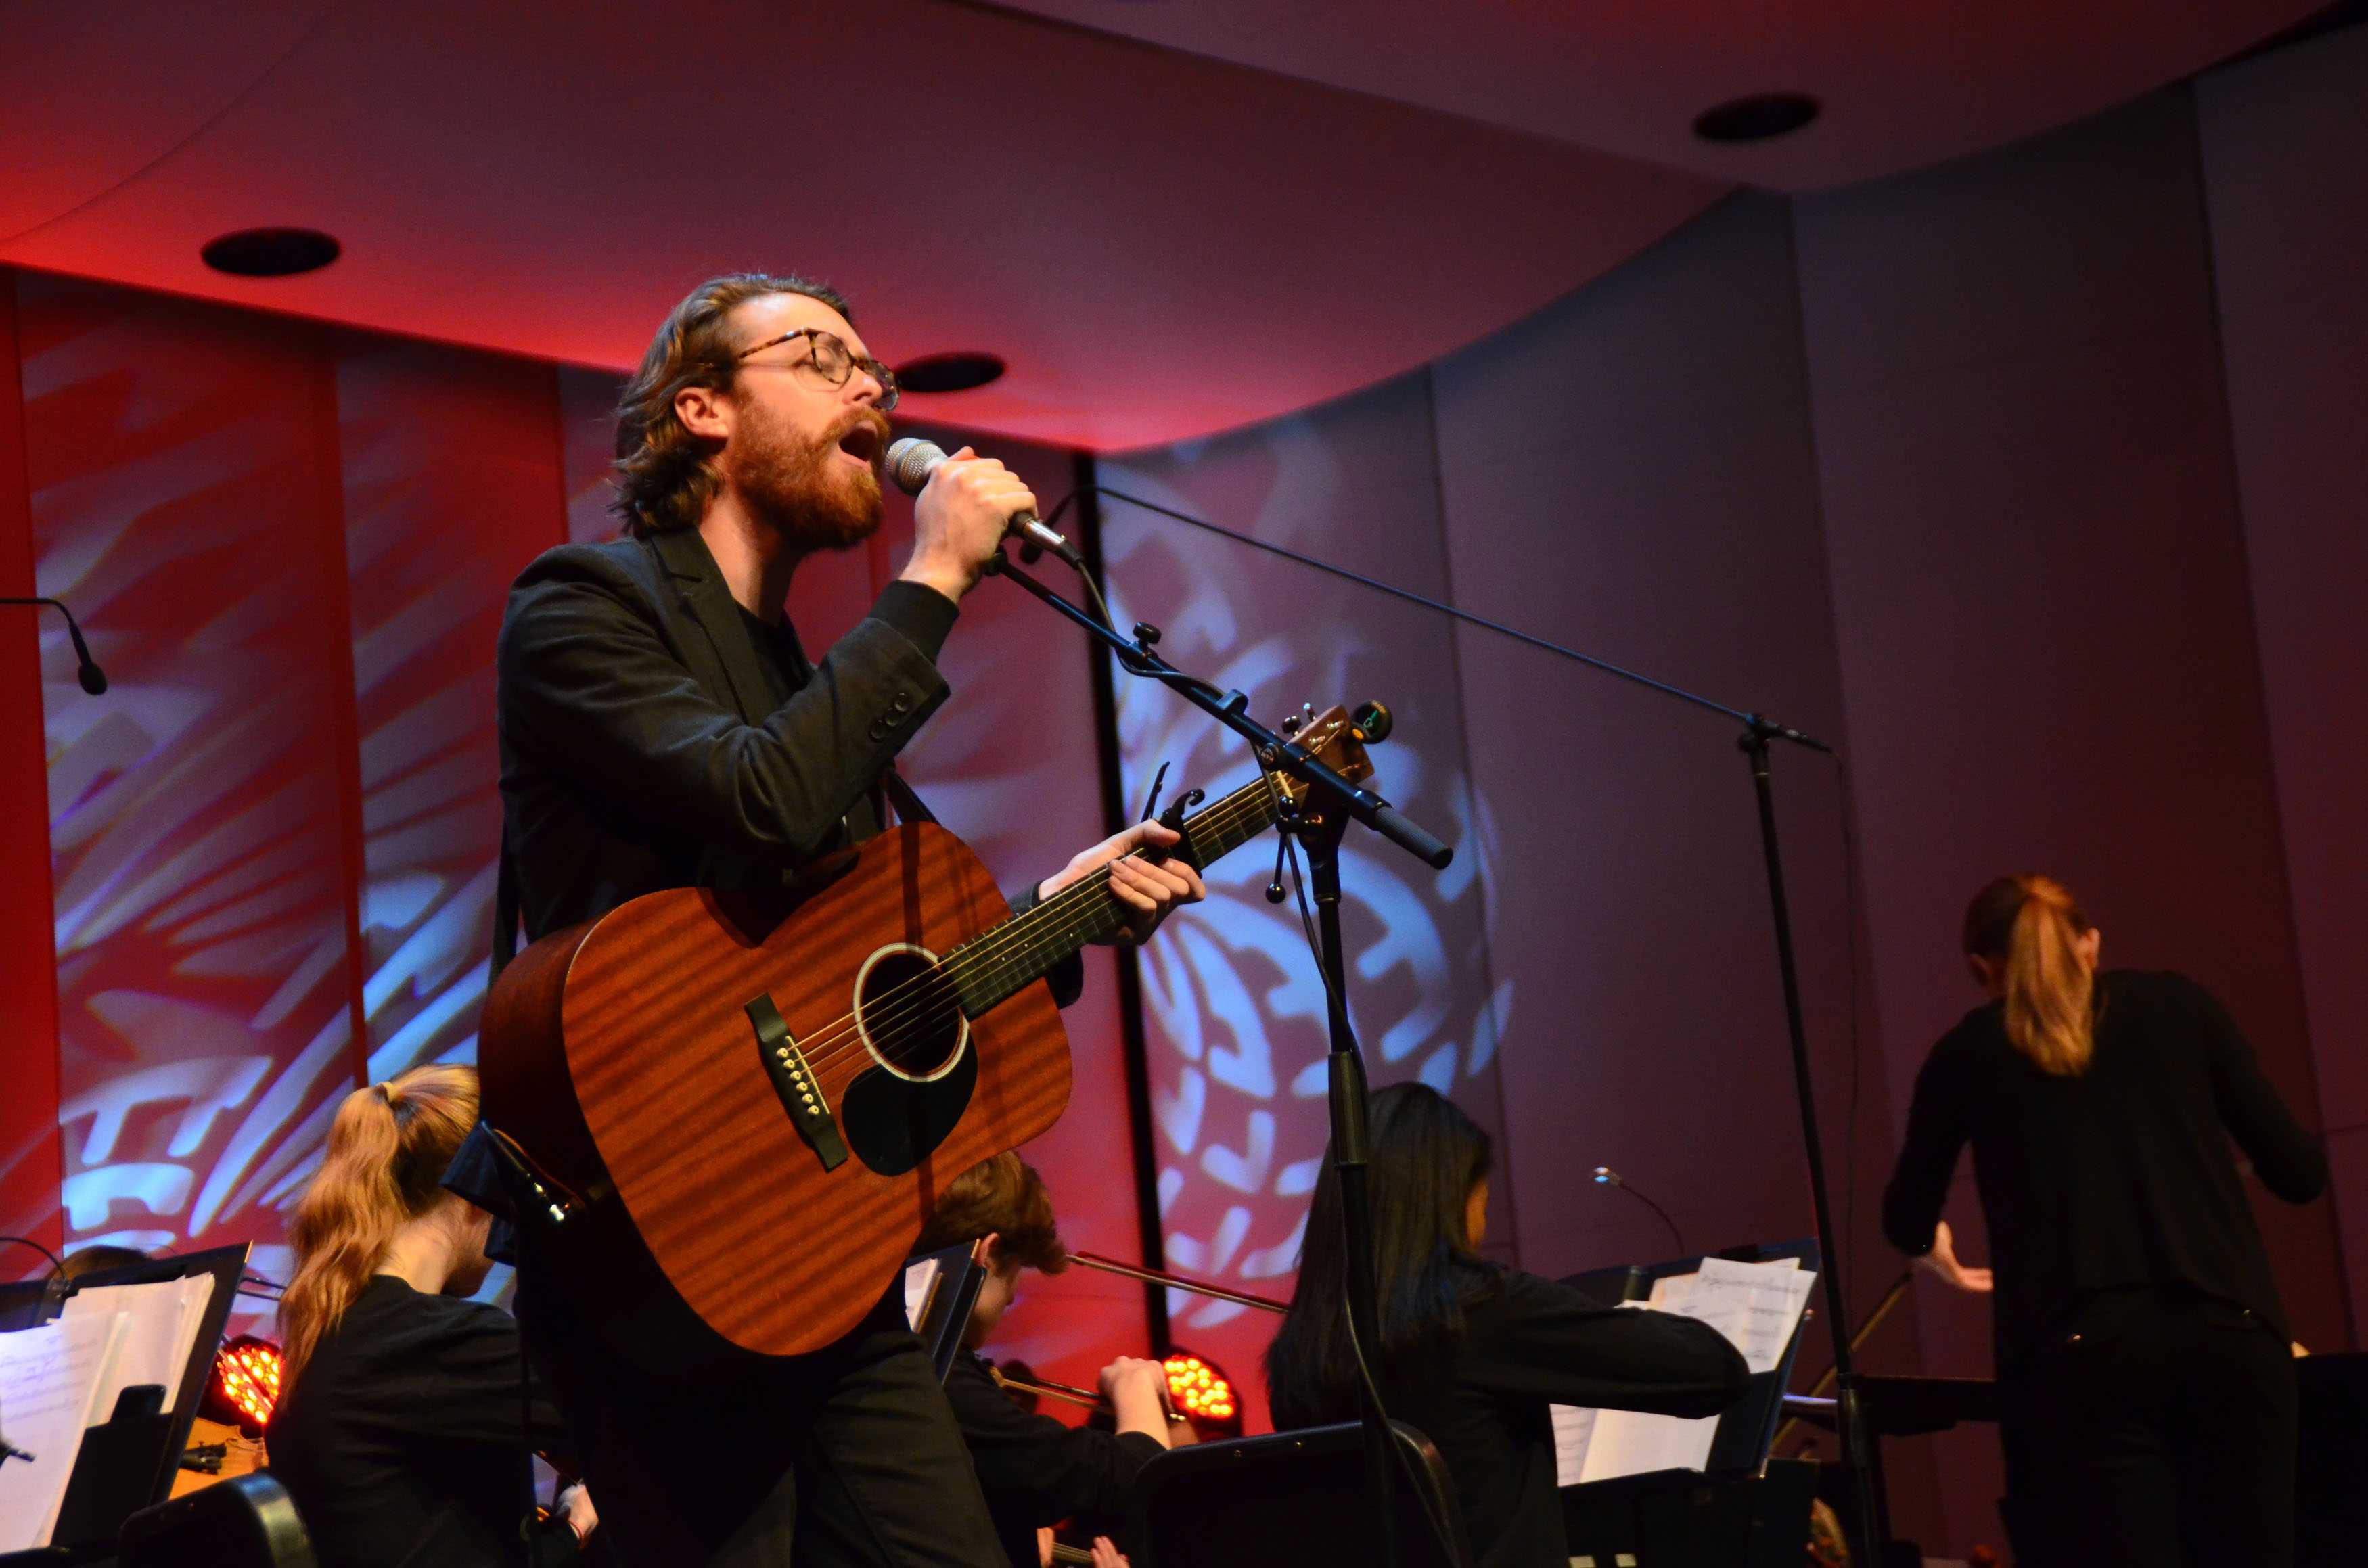 Jeremy+Messersmith+performs+at+Orchestra+Spotlight+Concert